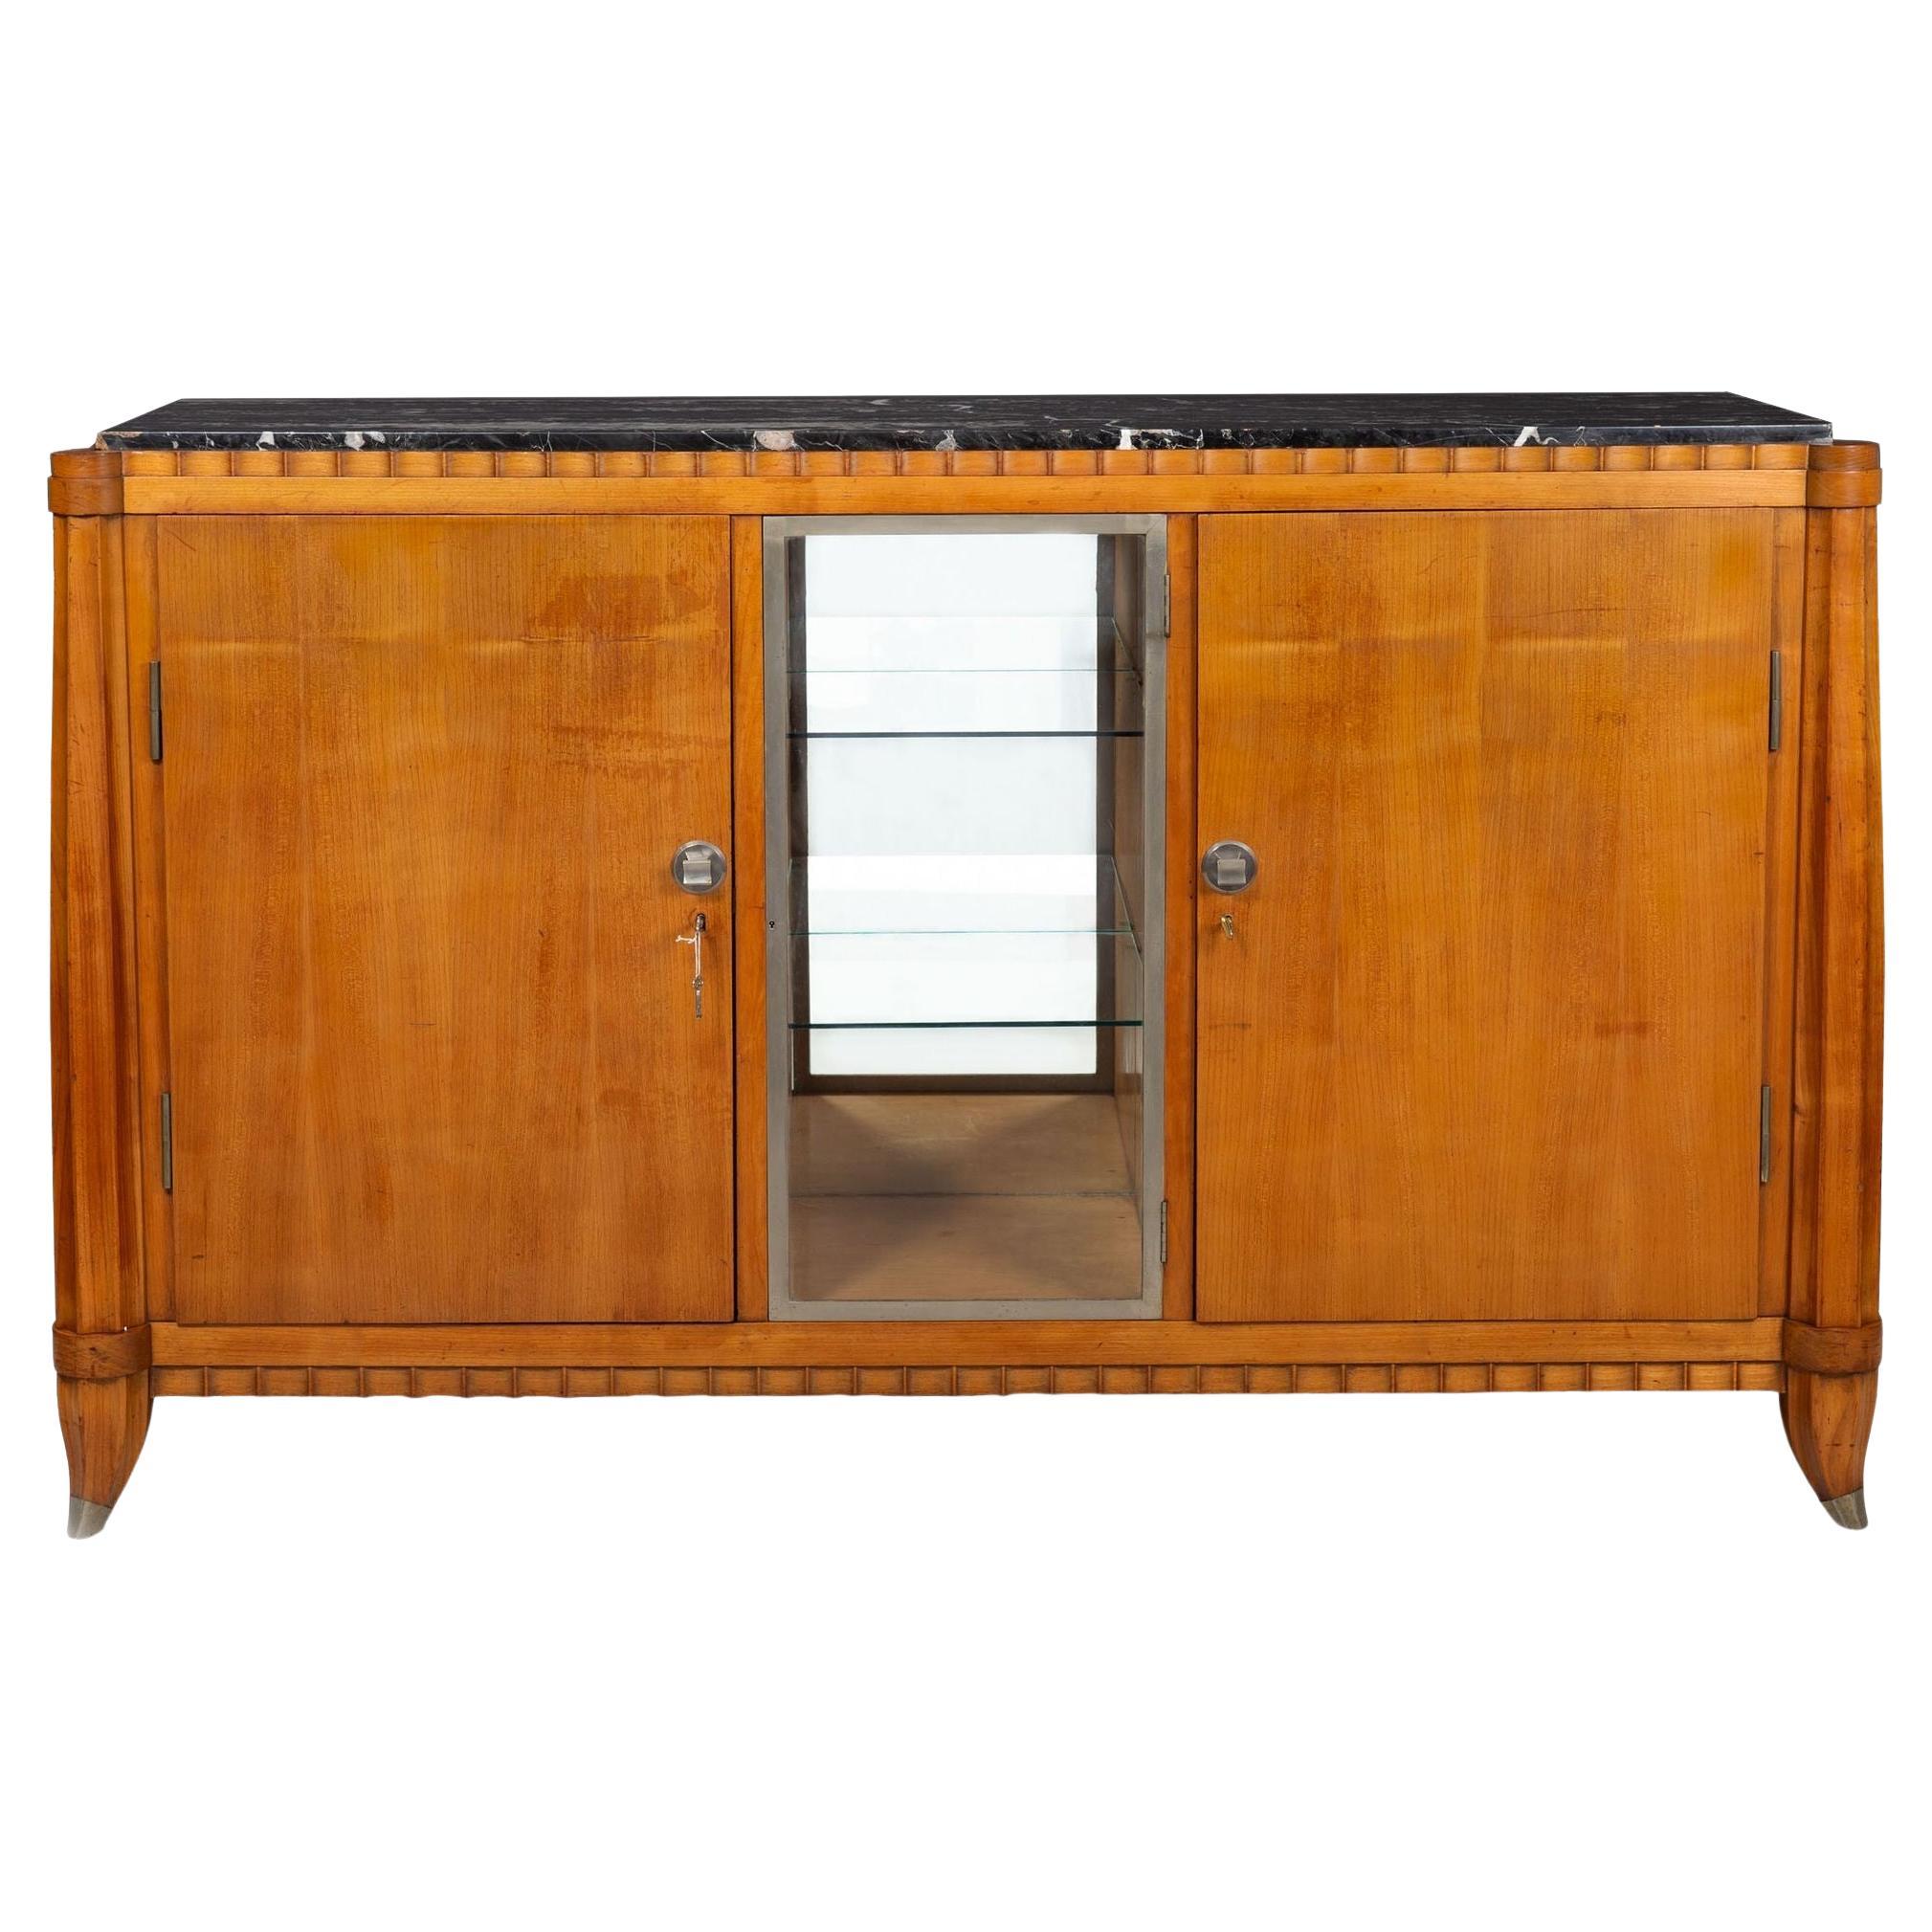 French Art Deco Cherry, Nickel and Marble Sideboard Credenza Cabinet For Sale